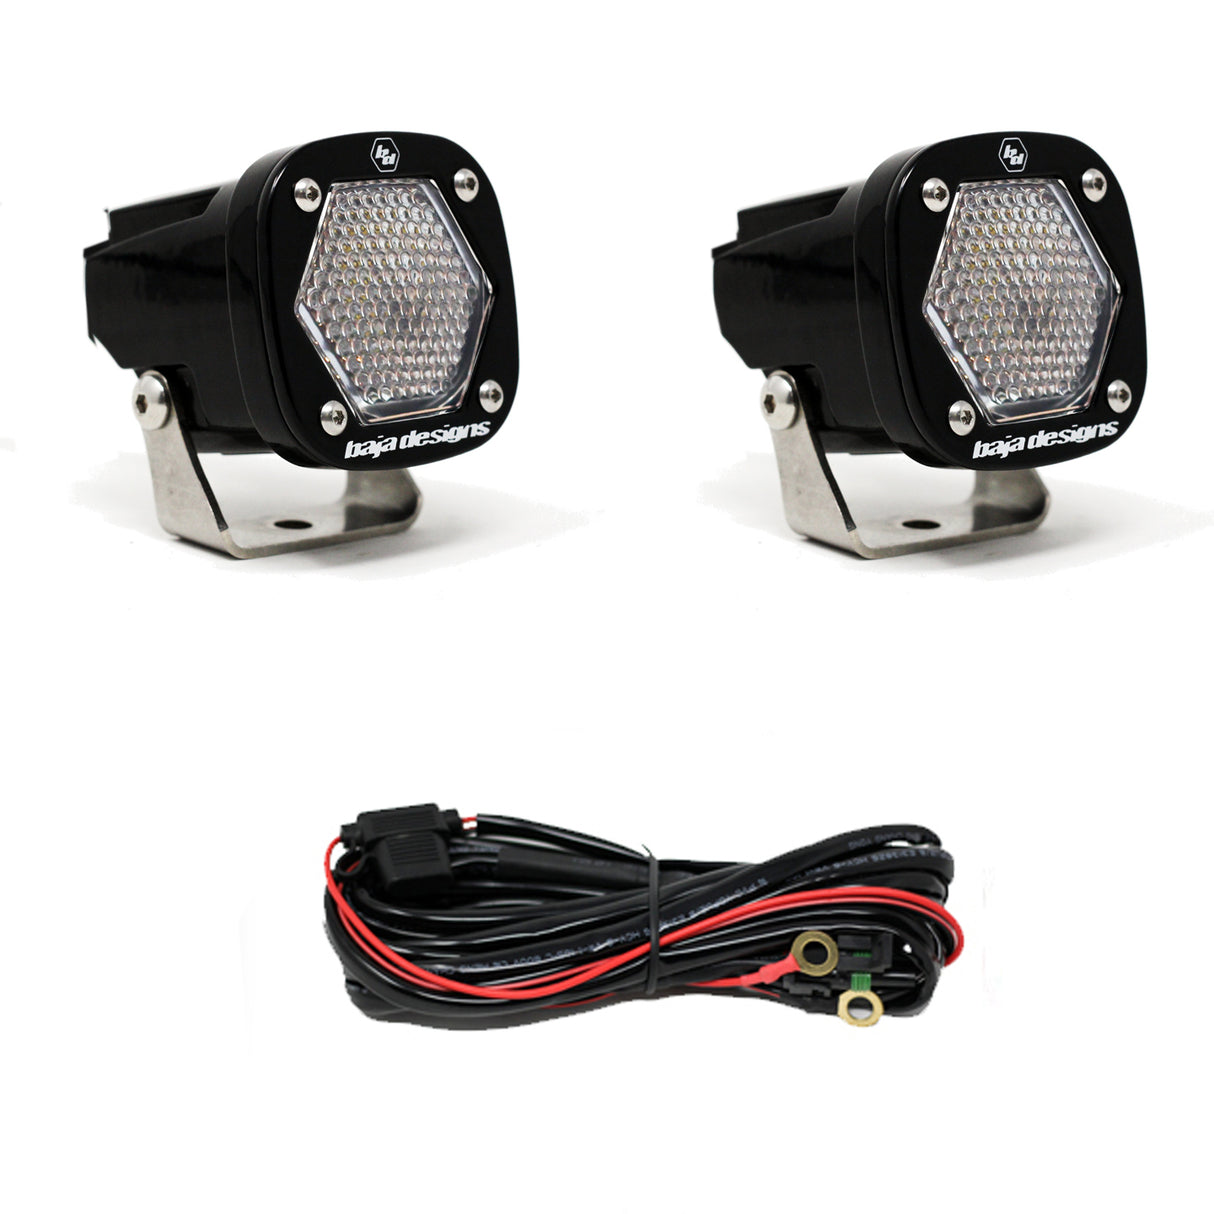 S1 Work/Scene LED Light with Mounting Bracket Pair Baja Designs - Roam Overland Outfitters